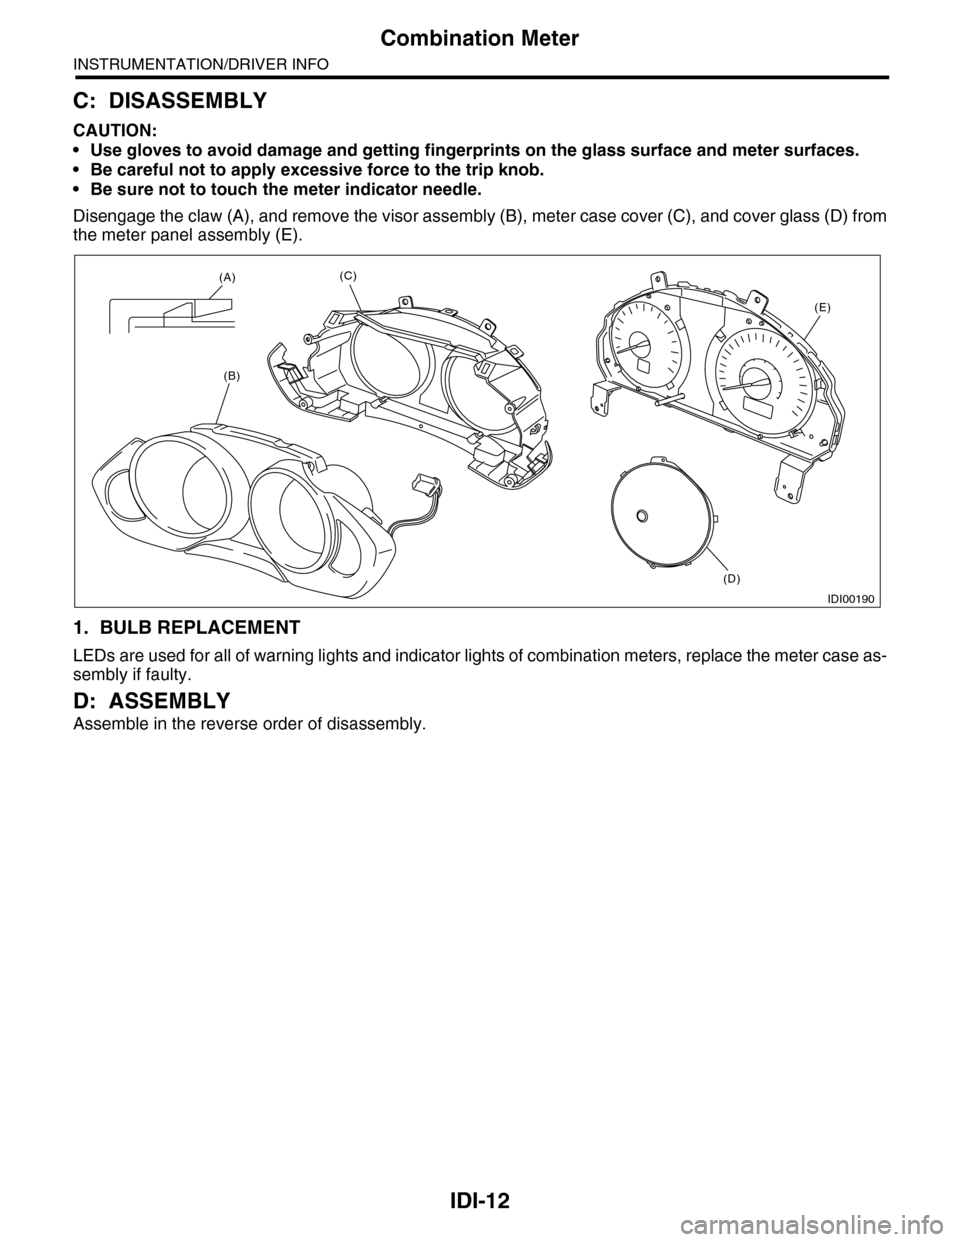 SUBARU TRIBECA 2009 1.G Service Workshop Manual IDI-12
Combination Meter
INSTRUMENTATION/DRIVER INFO
C: DISASSEMBLY
CAUTION:
•Use gloves to avoid damage and getting fingerprints on the glass surface and meter surfaces. 
•Be careful not to apply